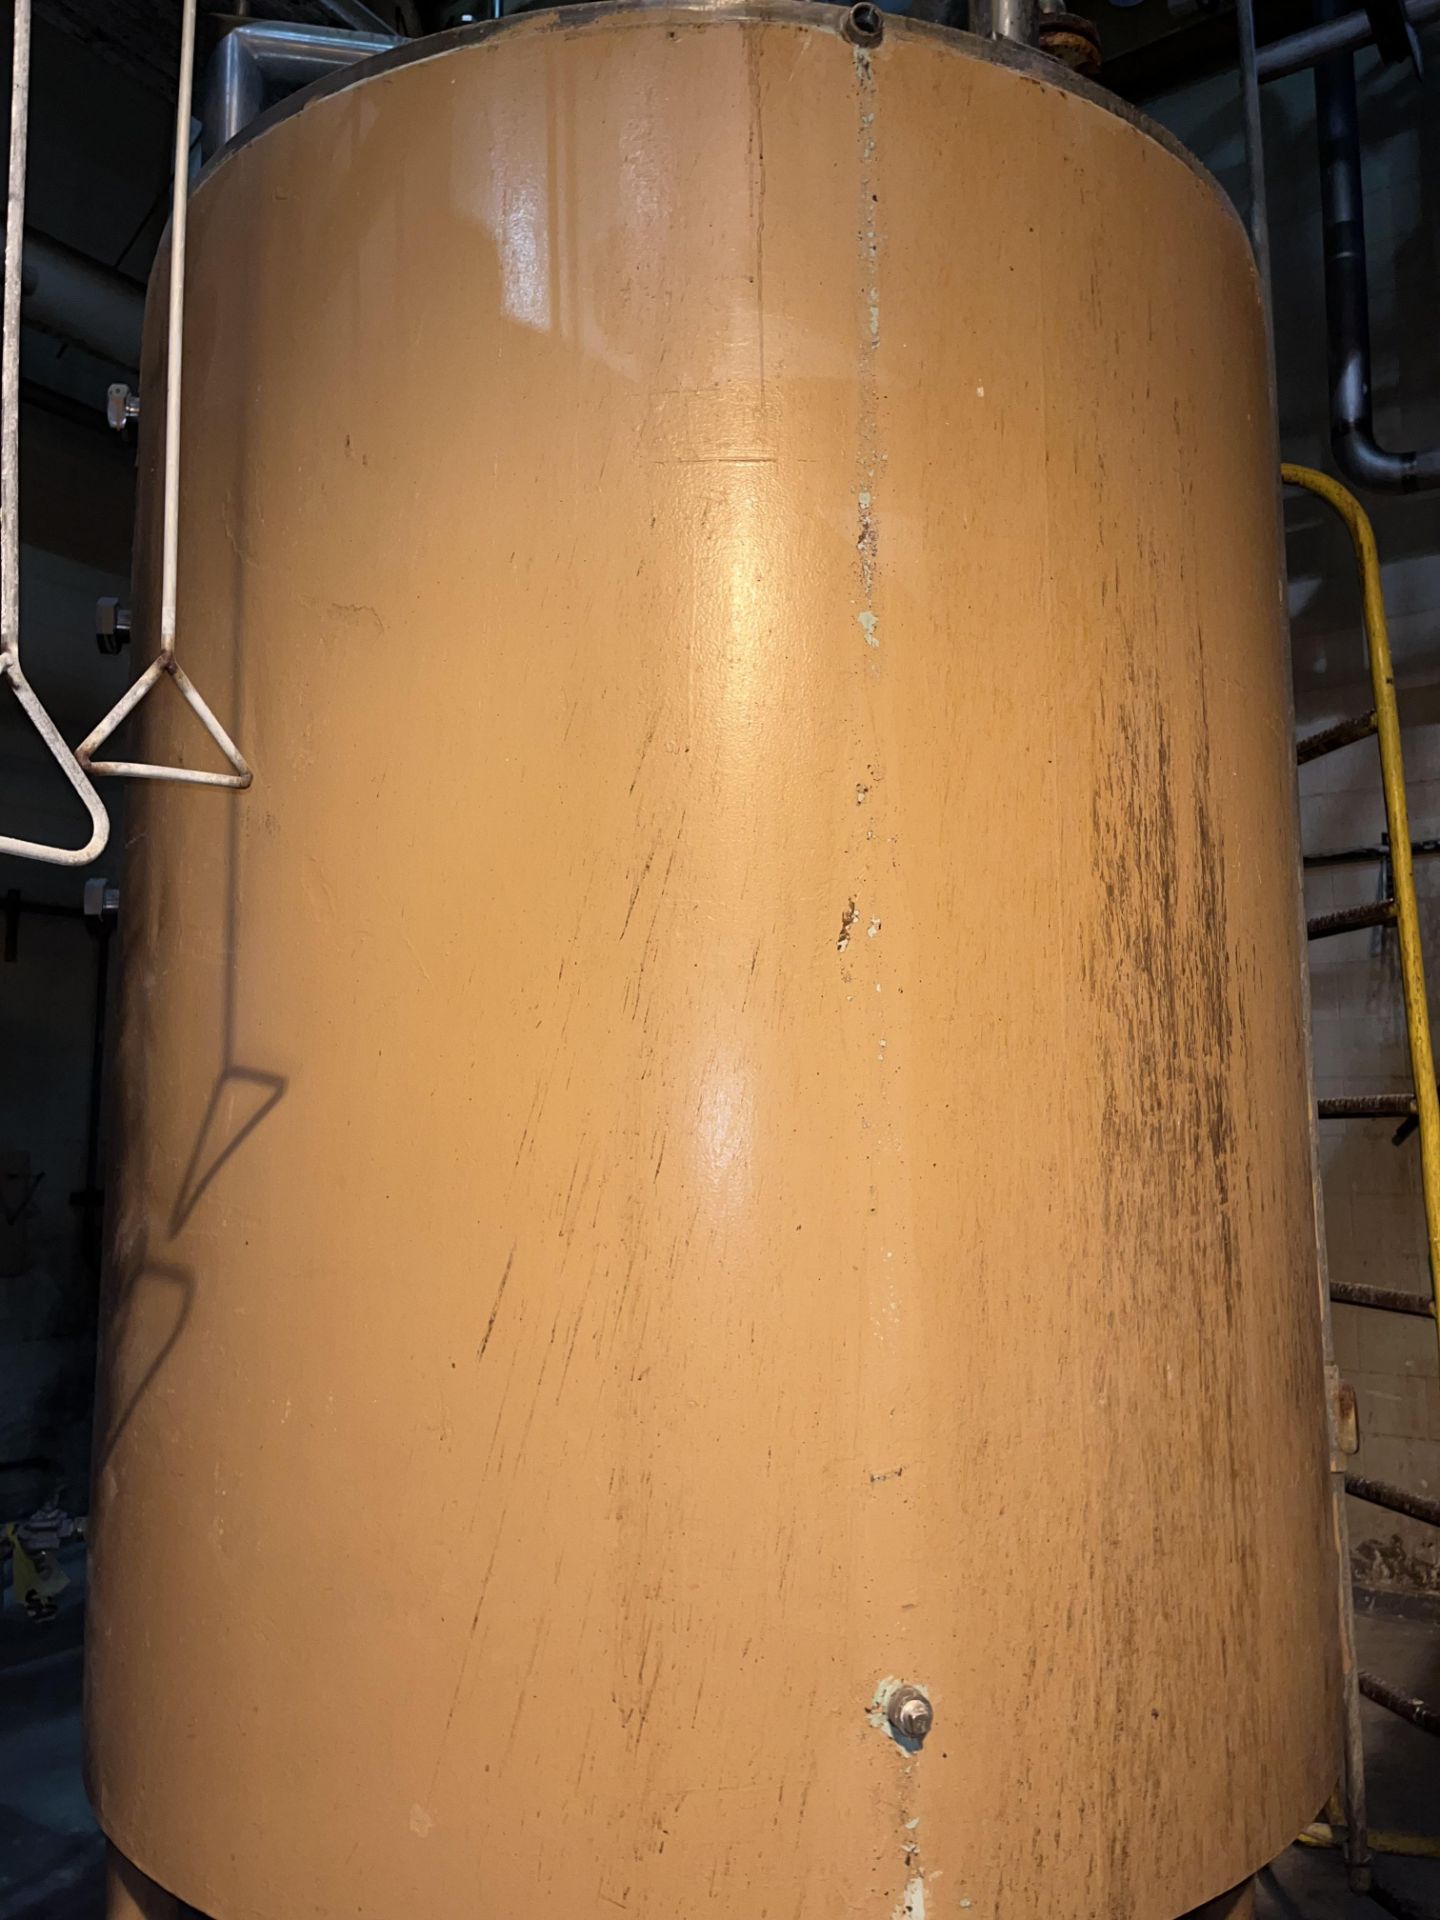 T05/18 20% DIST STORAGE TANK 1,200 GALLONS (Located Freehold, NJ) (Simple Loading Fee $ 2,915) - Image 3 of 3